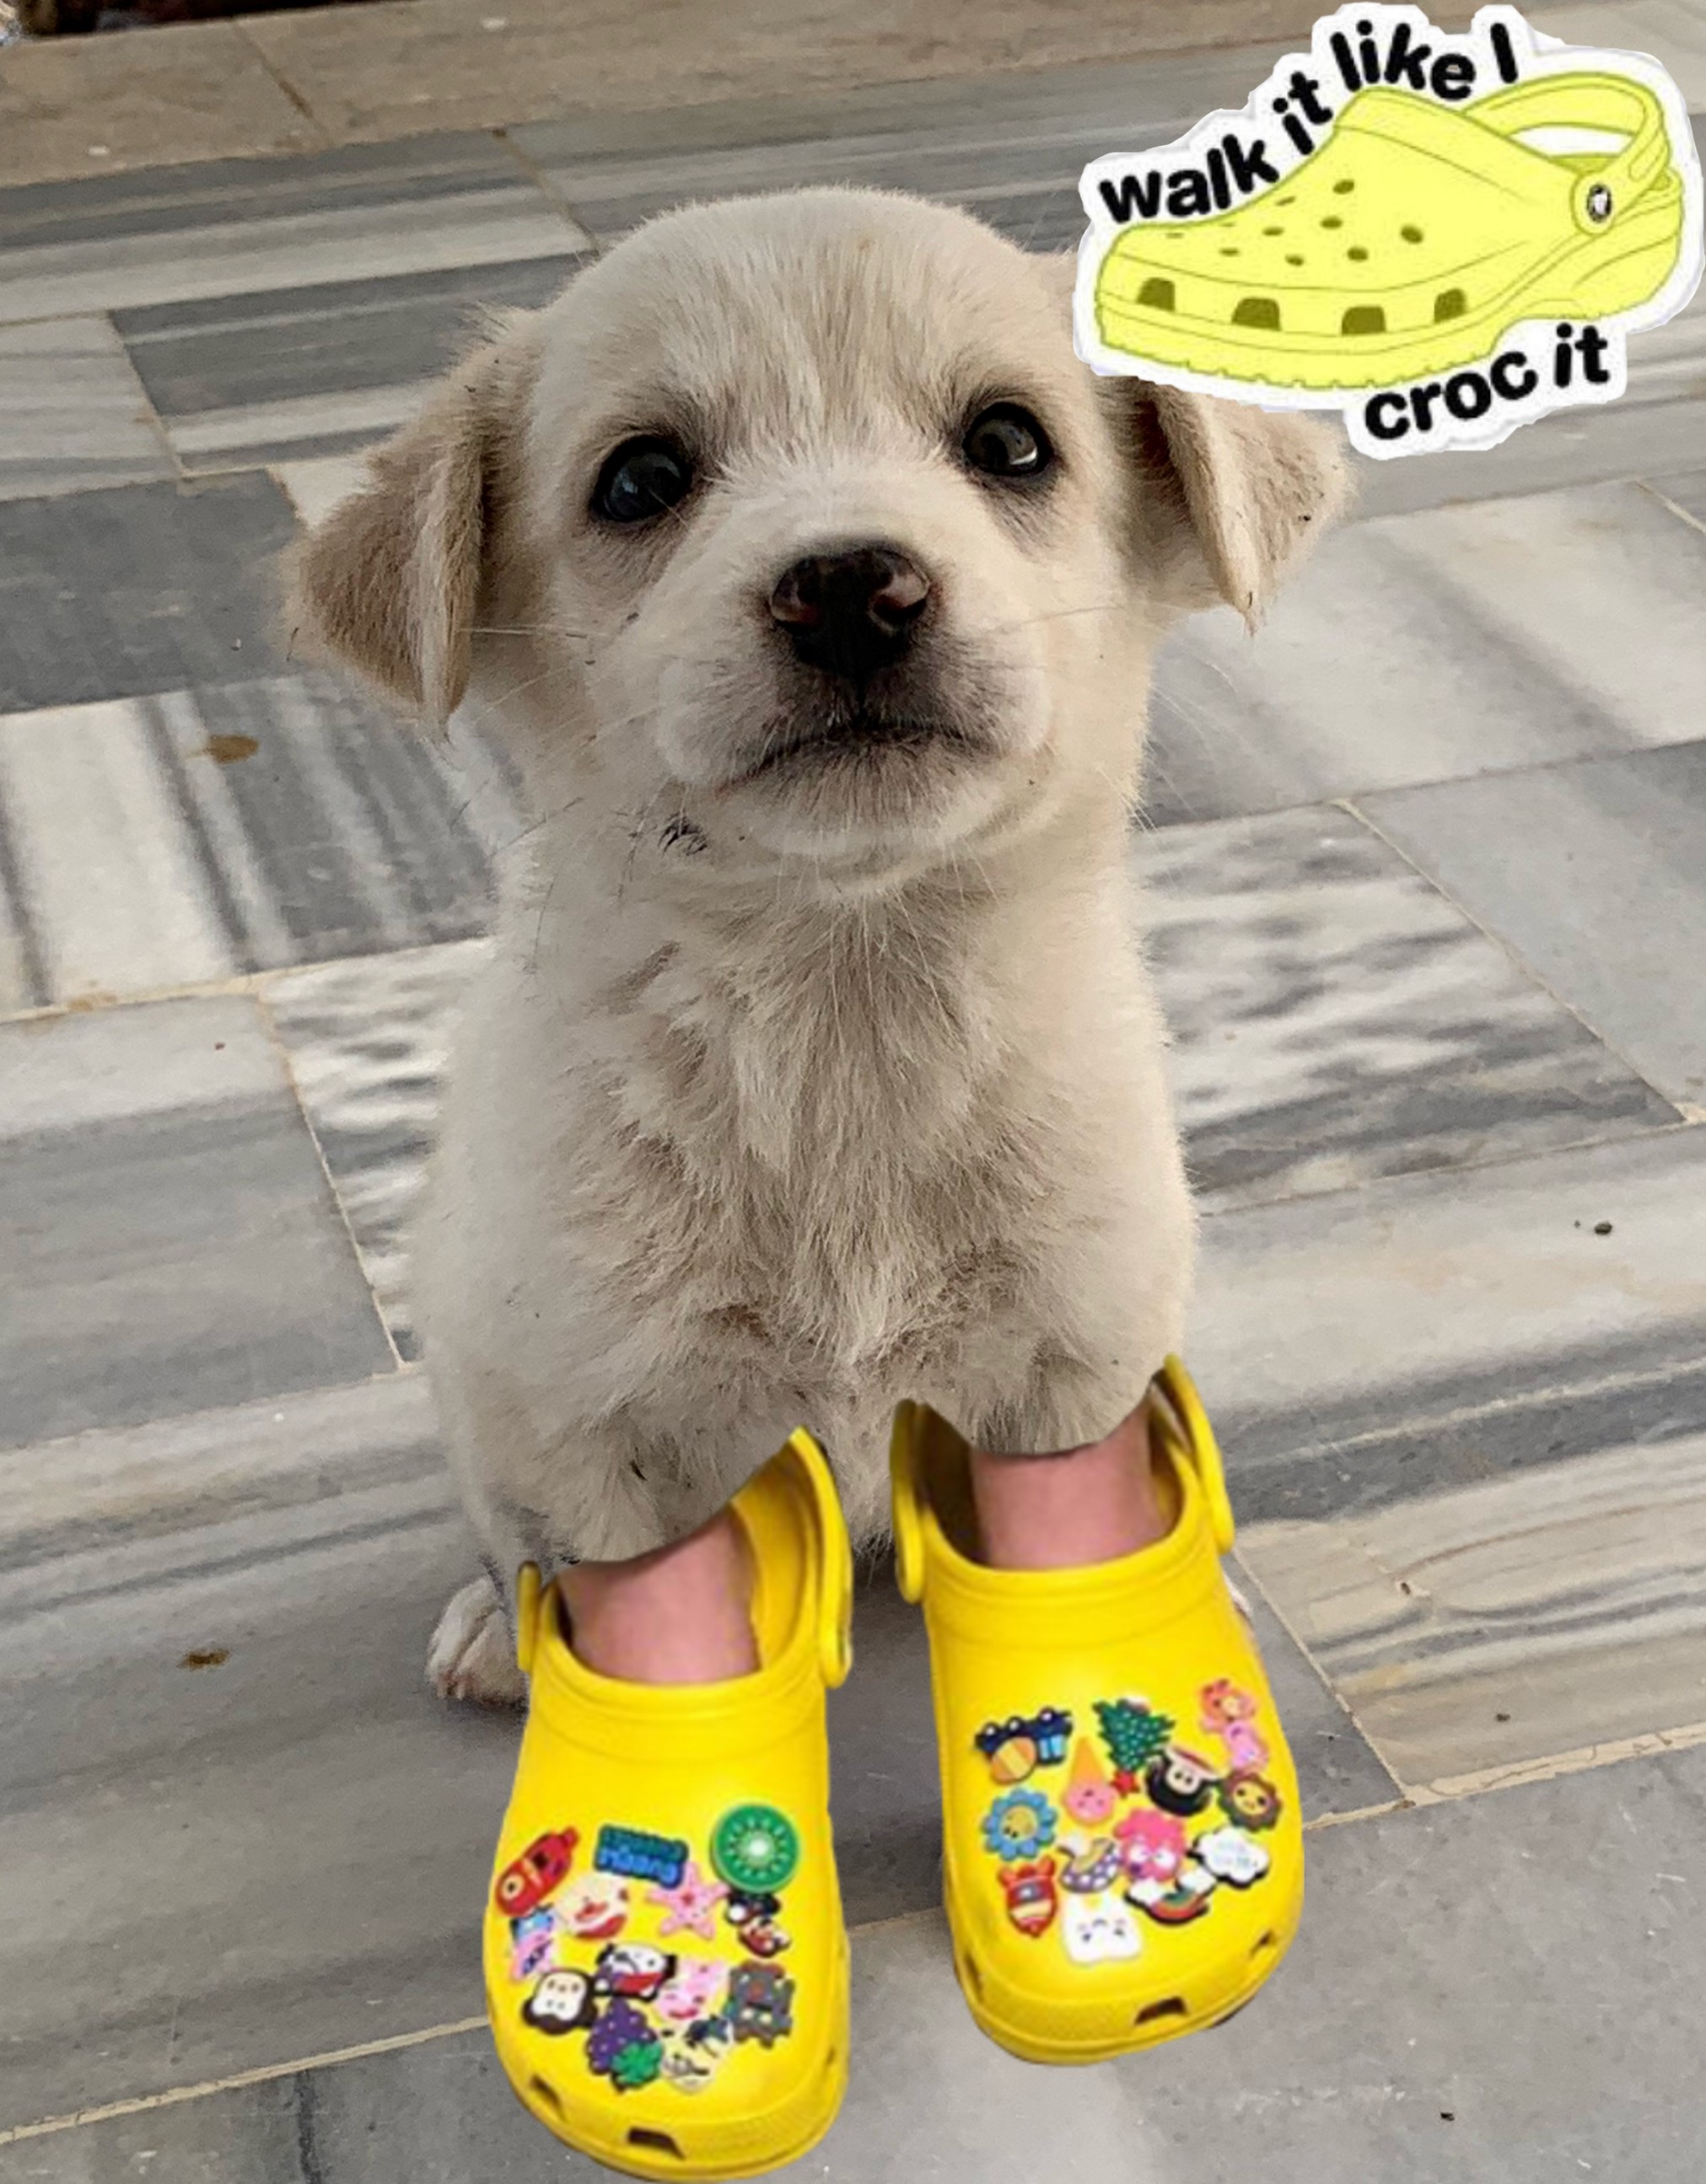 crocs with dogs on them